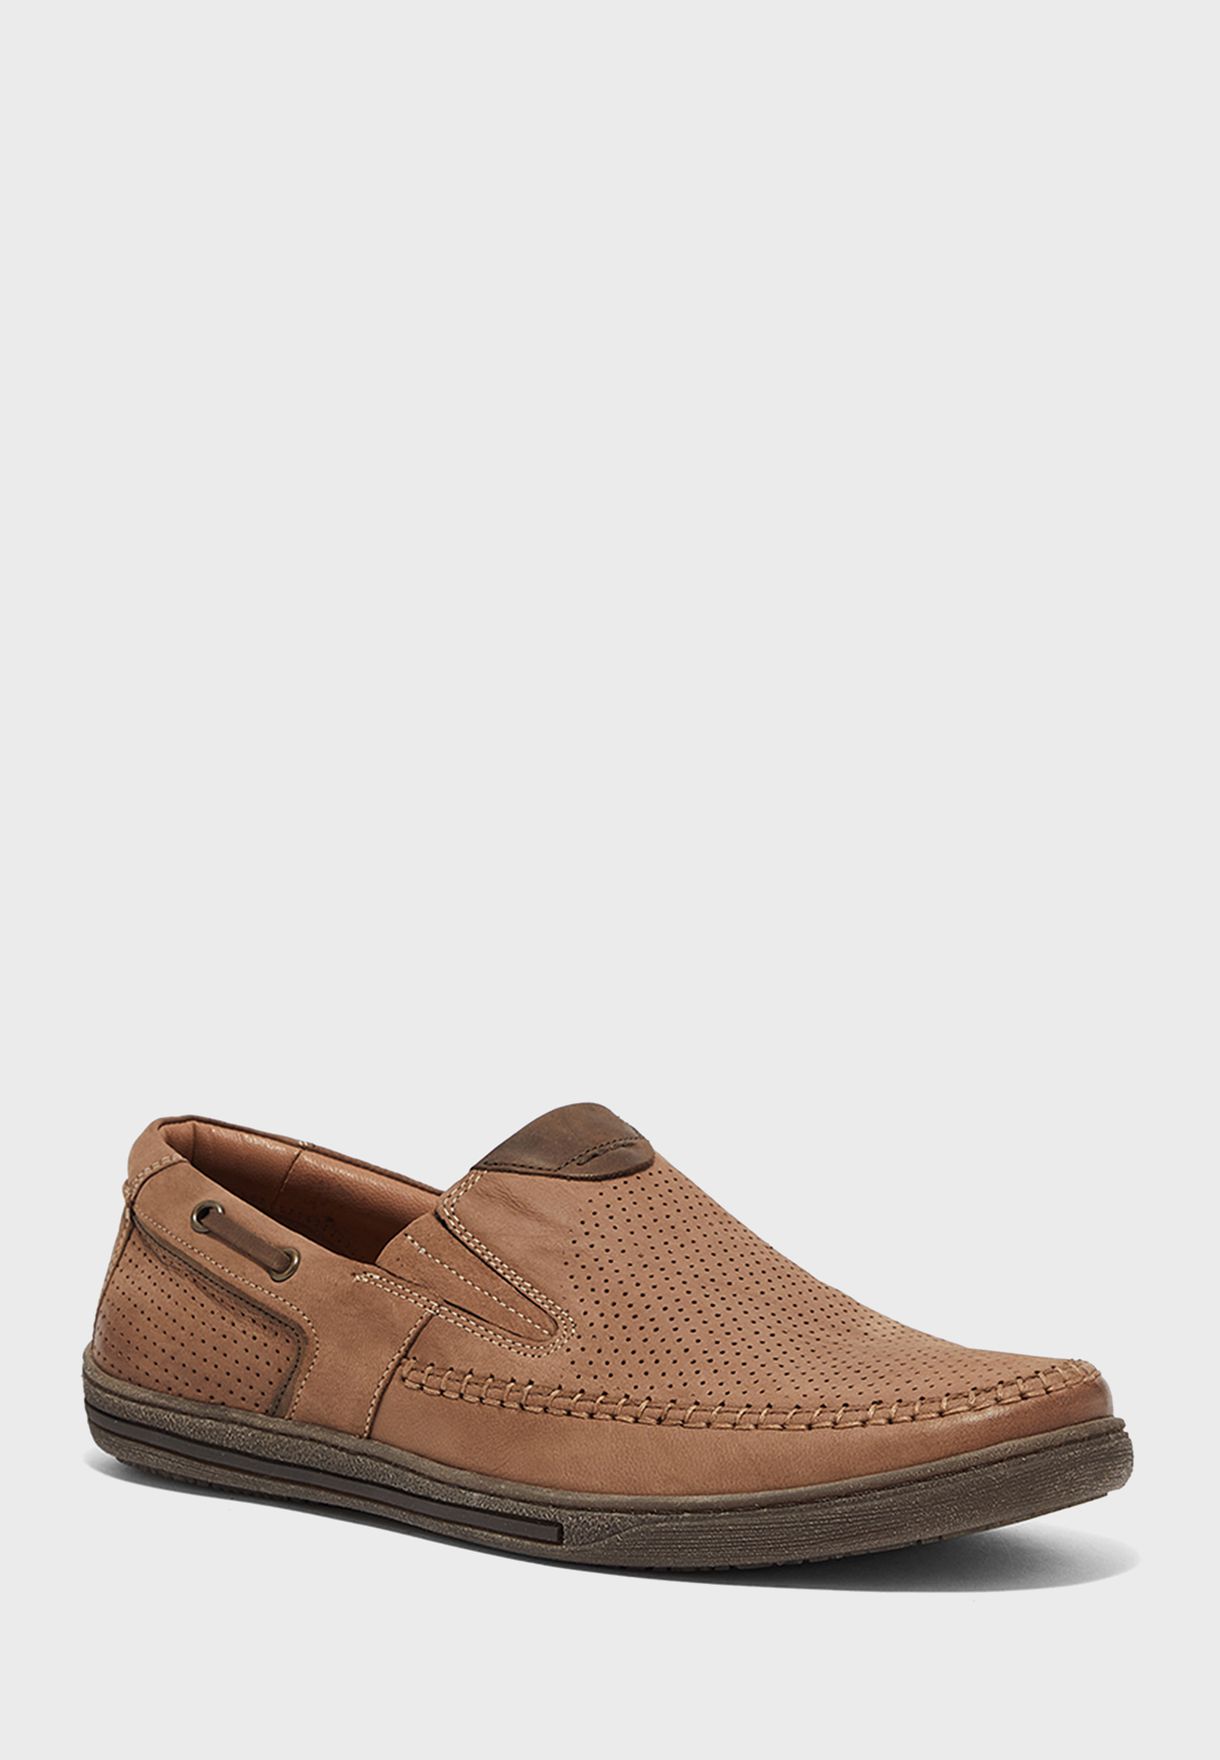 Go Soft Loafers & Moccasins Shoe